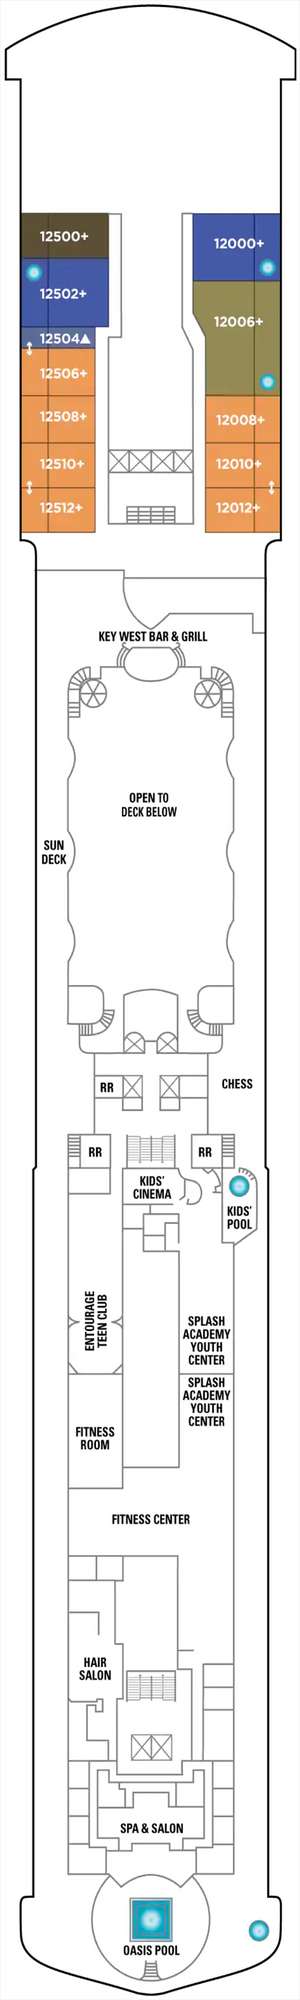 Deck plan for Pride of America